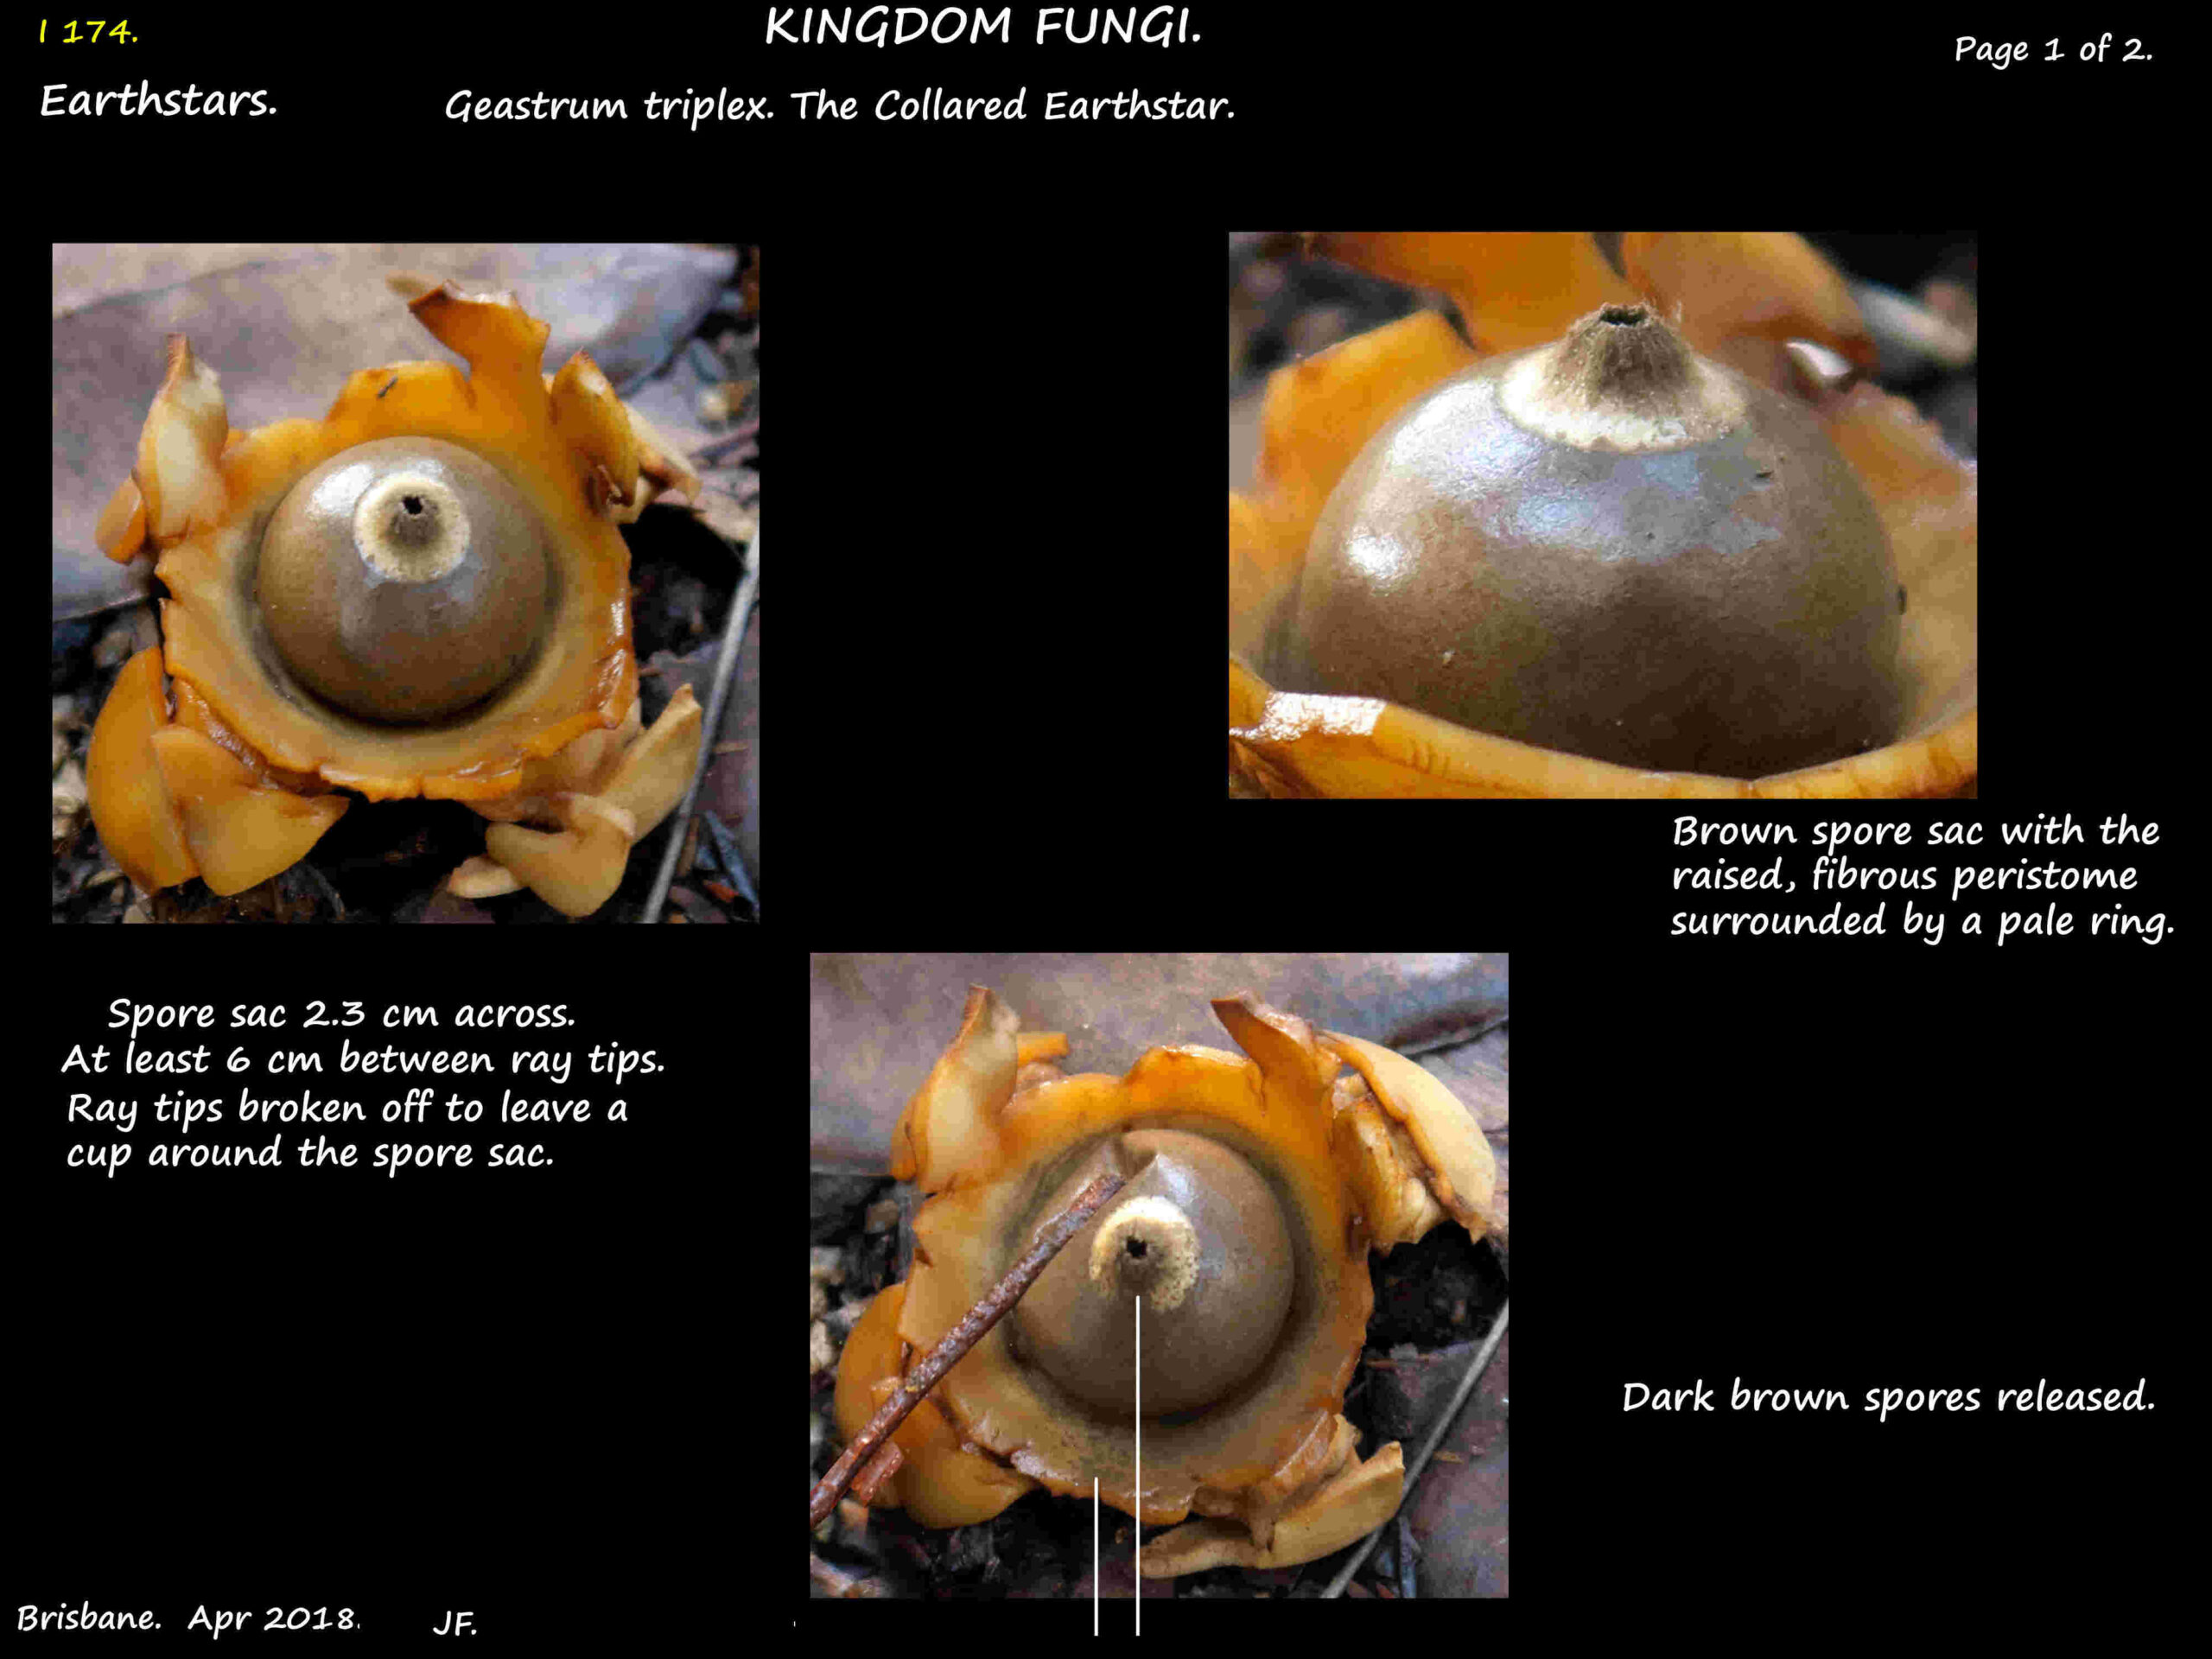 1 The structure of a Gaestrum earthstar